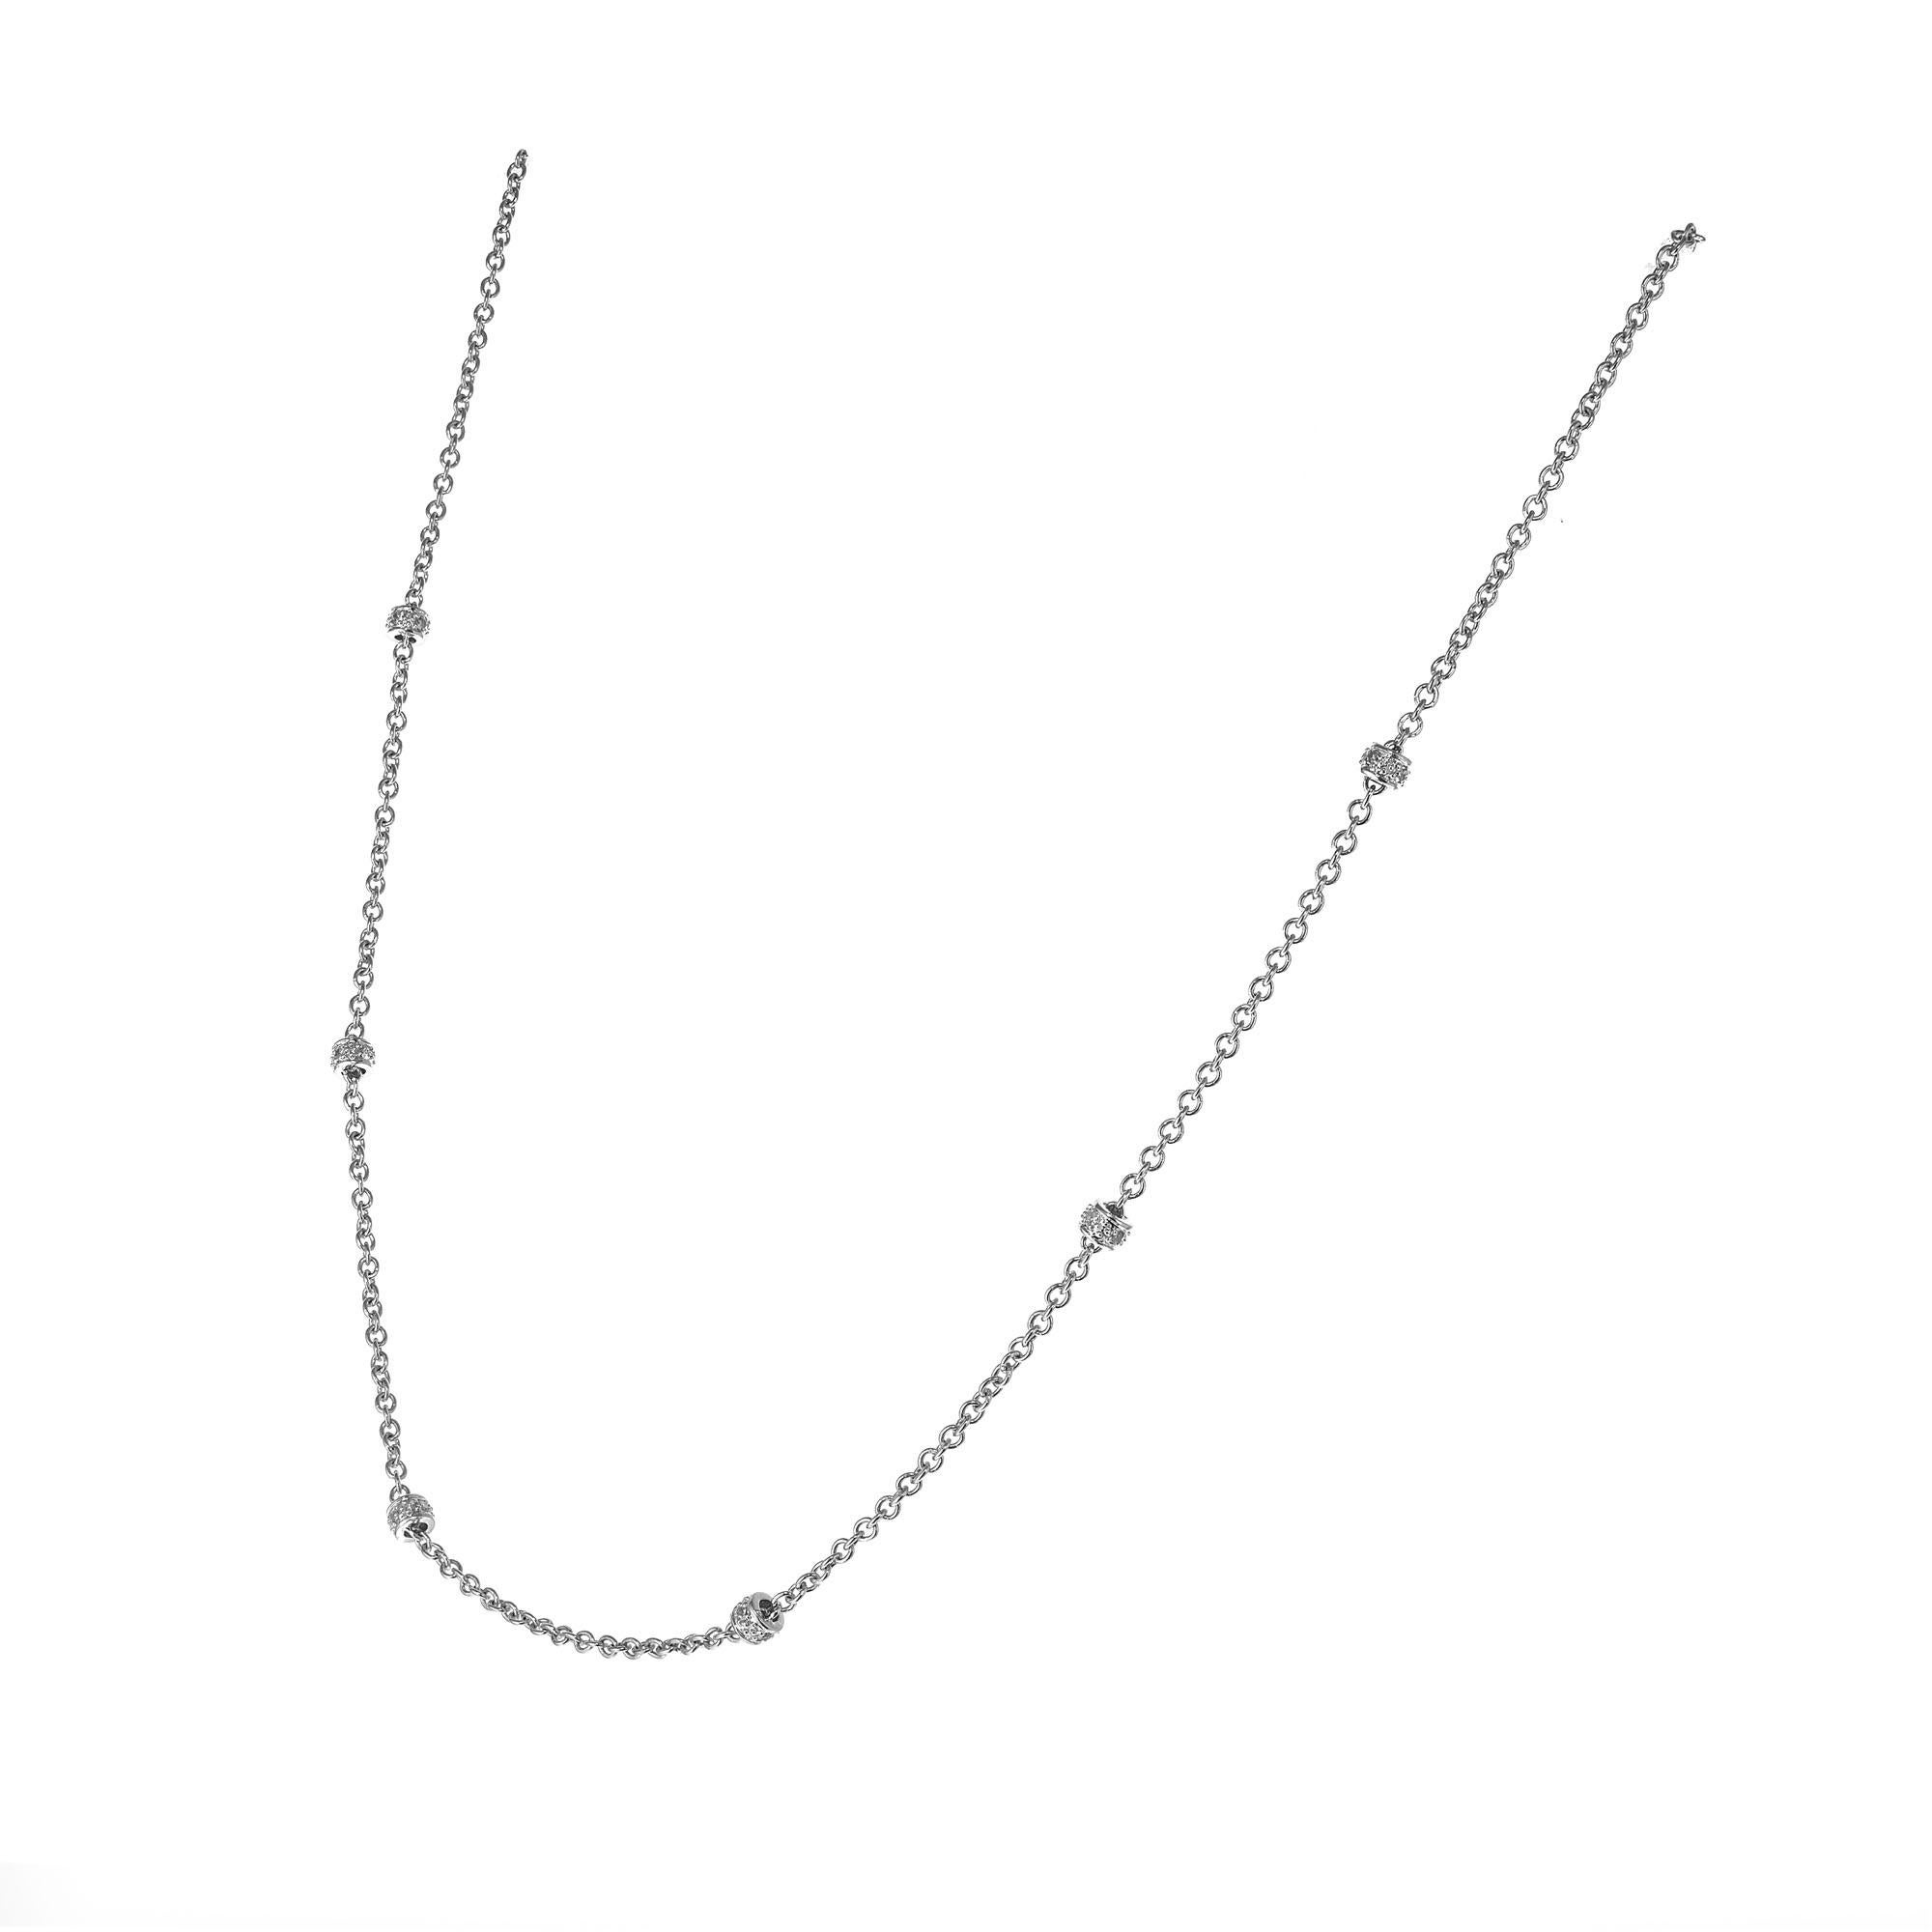 Diamond by the Yard necklace with six diamond rondels at total of .30 carat diamonds in a 14k white gold. Lobster catch. 16 inches in length. 

30 round single cut diamonds, H-I SI approx. .30cts
14k white gold 
Stamped: 585
3.7 grams
Total length: